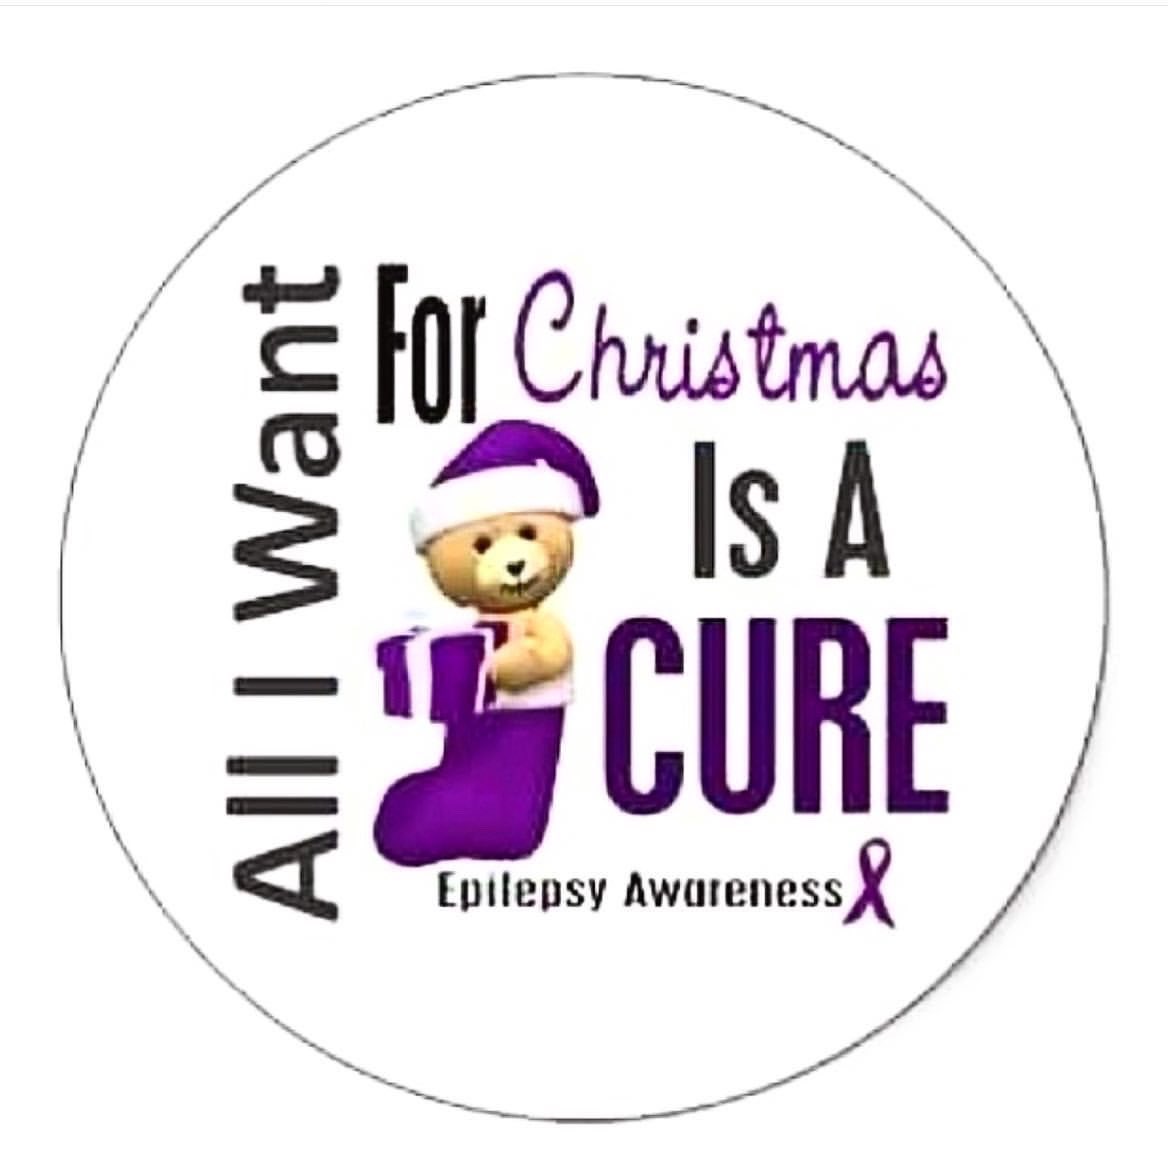 Happy #PURPLEFriday and Happy Holidays! 🎄💜

“All things are possible if you believe.”

Visit: angelsofepilepsy.org and support the cause! 

#AngelsOfEpilepsy #AOEinc #Nonprofit #Charity #GreatCause #EpilepsyOutreach #1in26 #AOEcares #AOEgives #HappyHolidays